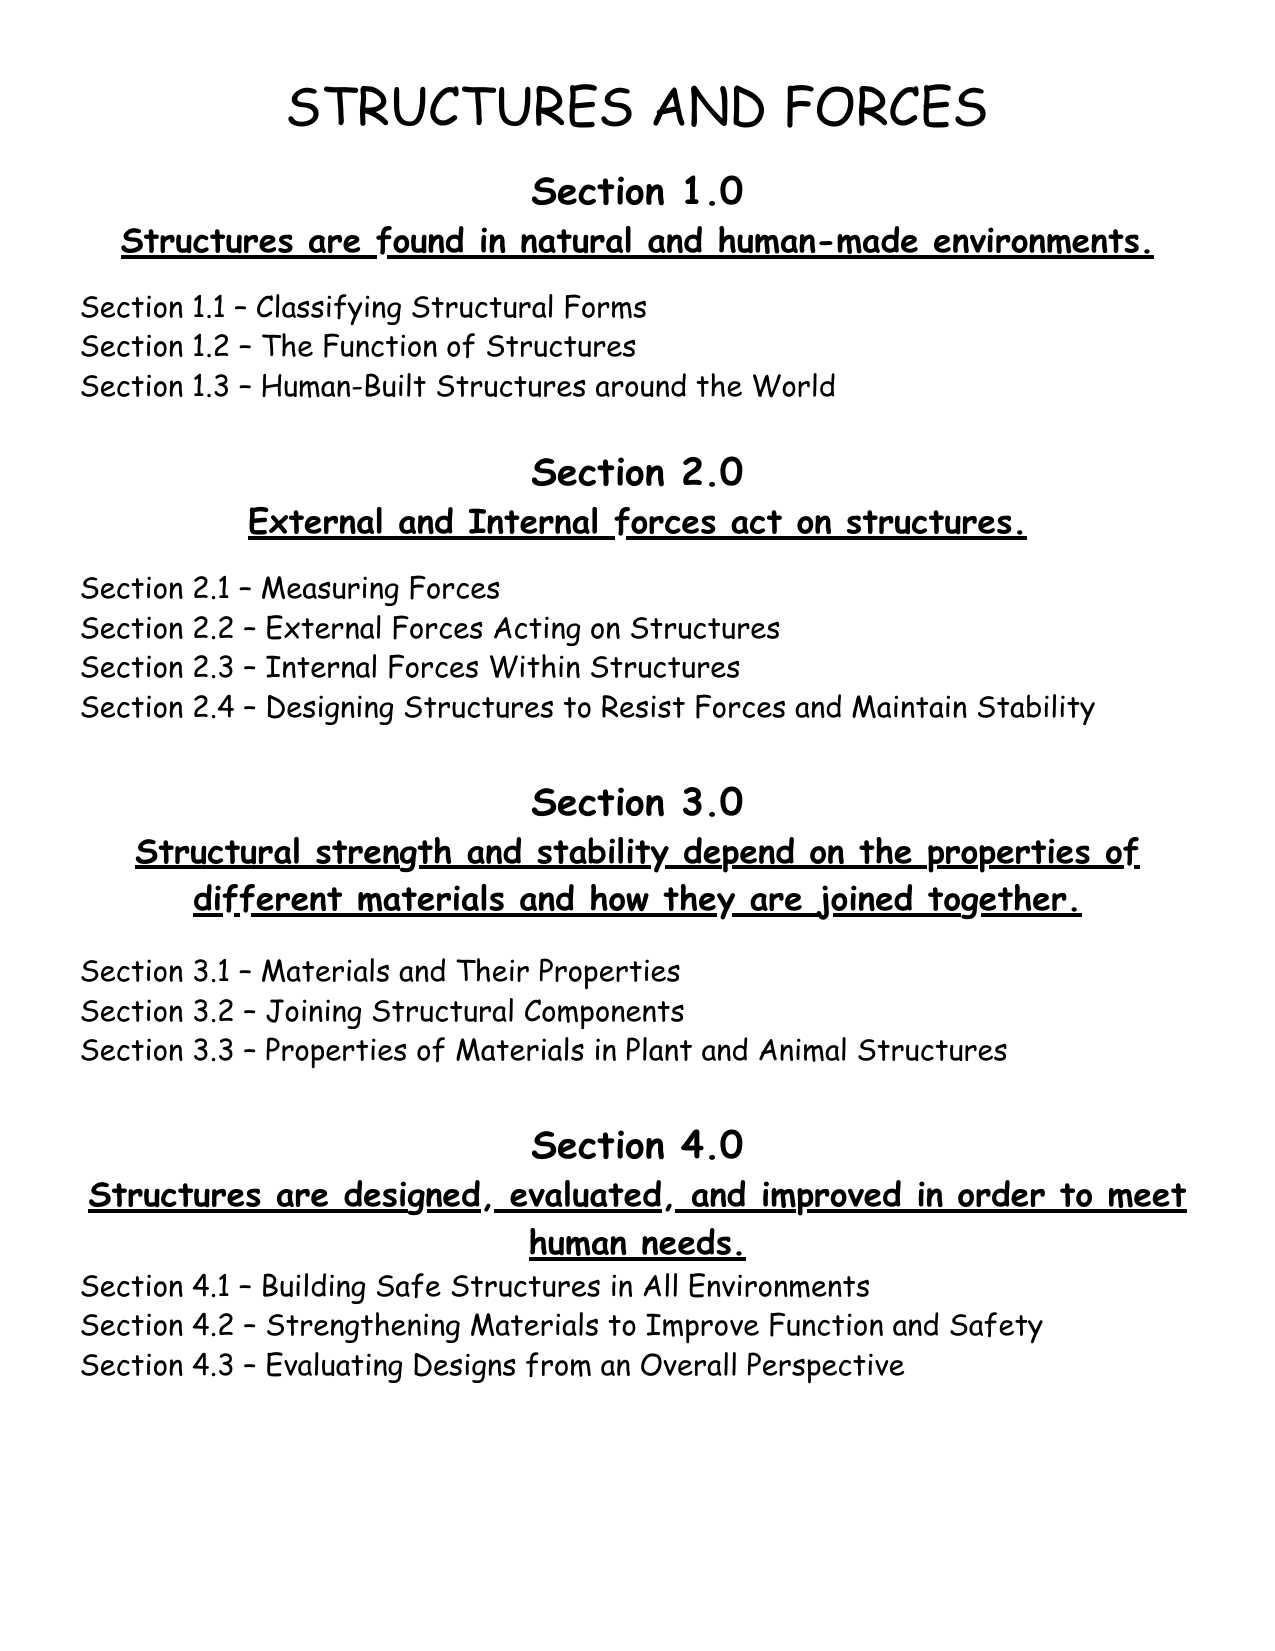 Chapter 2 origins Of American Government Worksheet Answers Also Science 7 Structure and forces Unit and Lesson Plans Resource